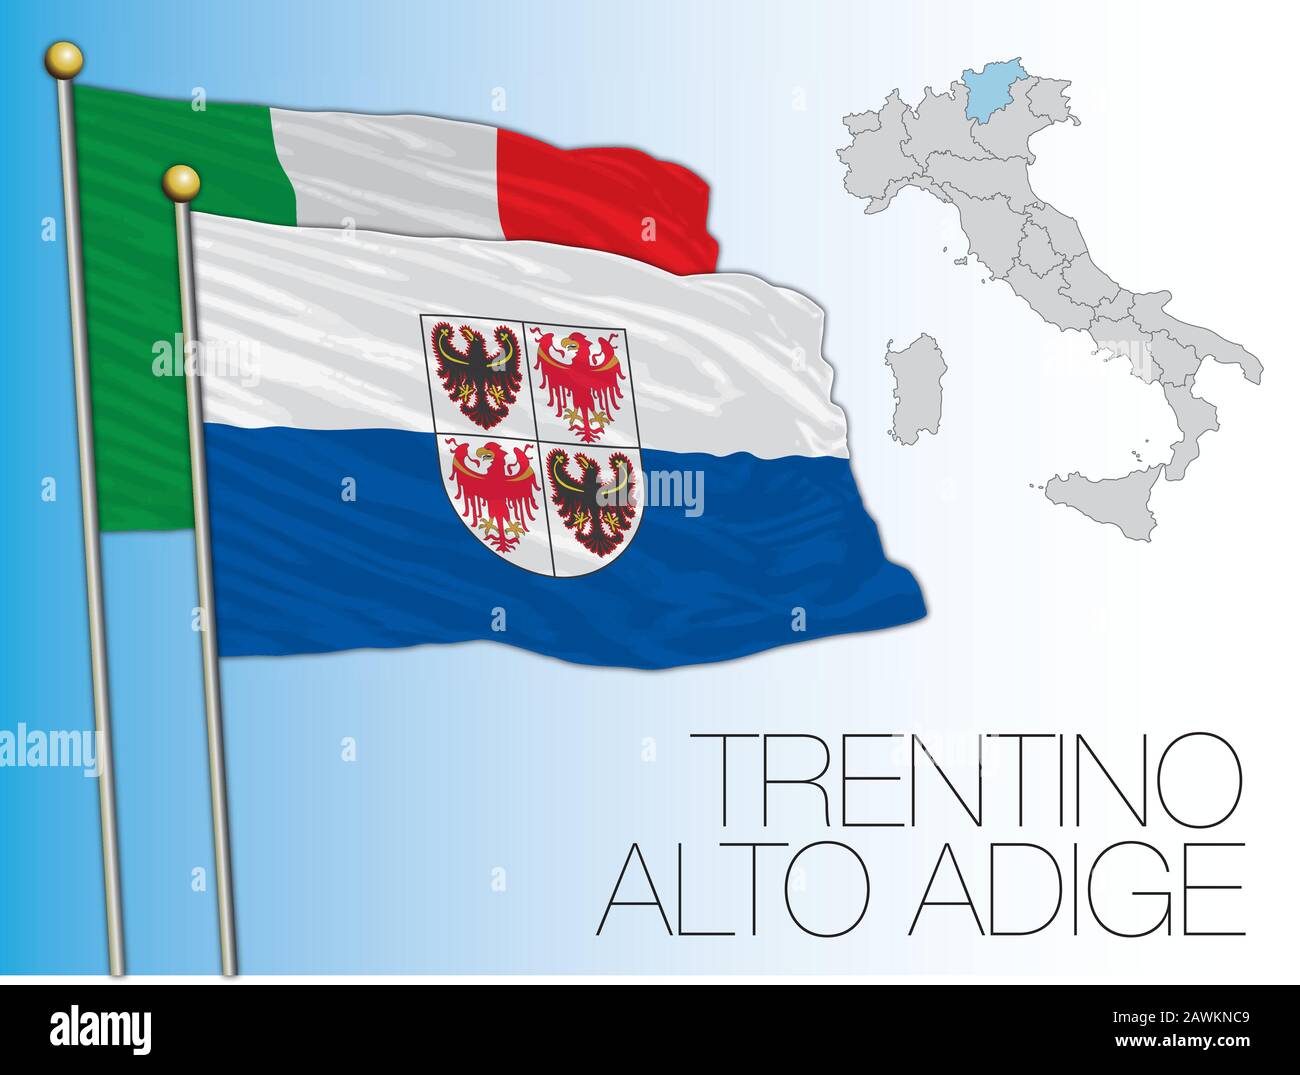 Trentino Alto Adige official regional flag and map, Italy, vector illustration Stock Vector